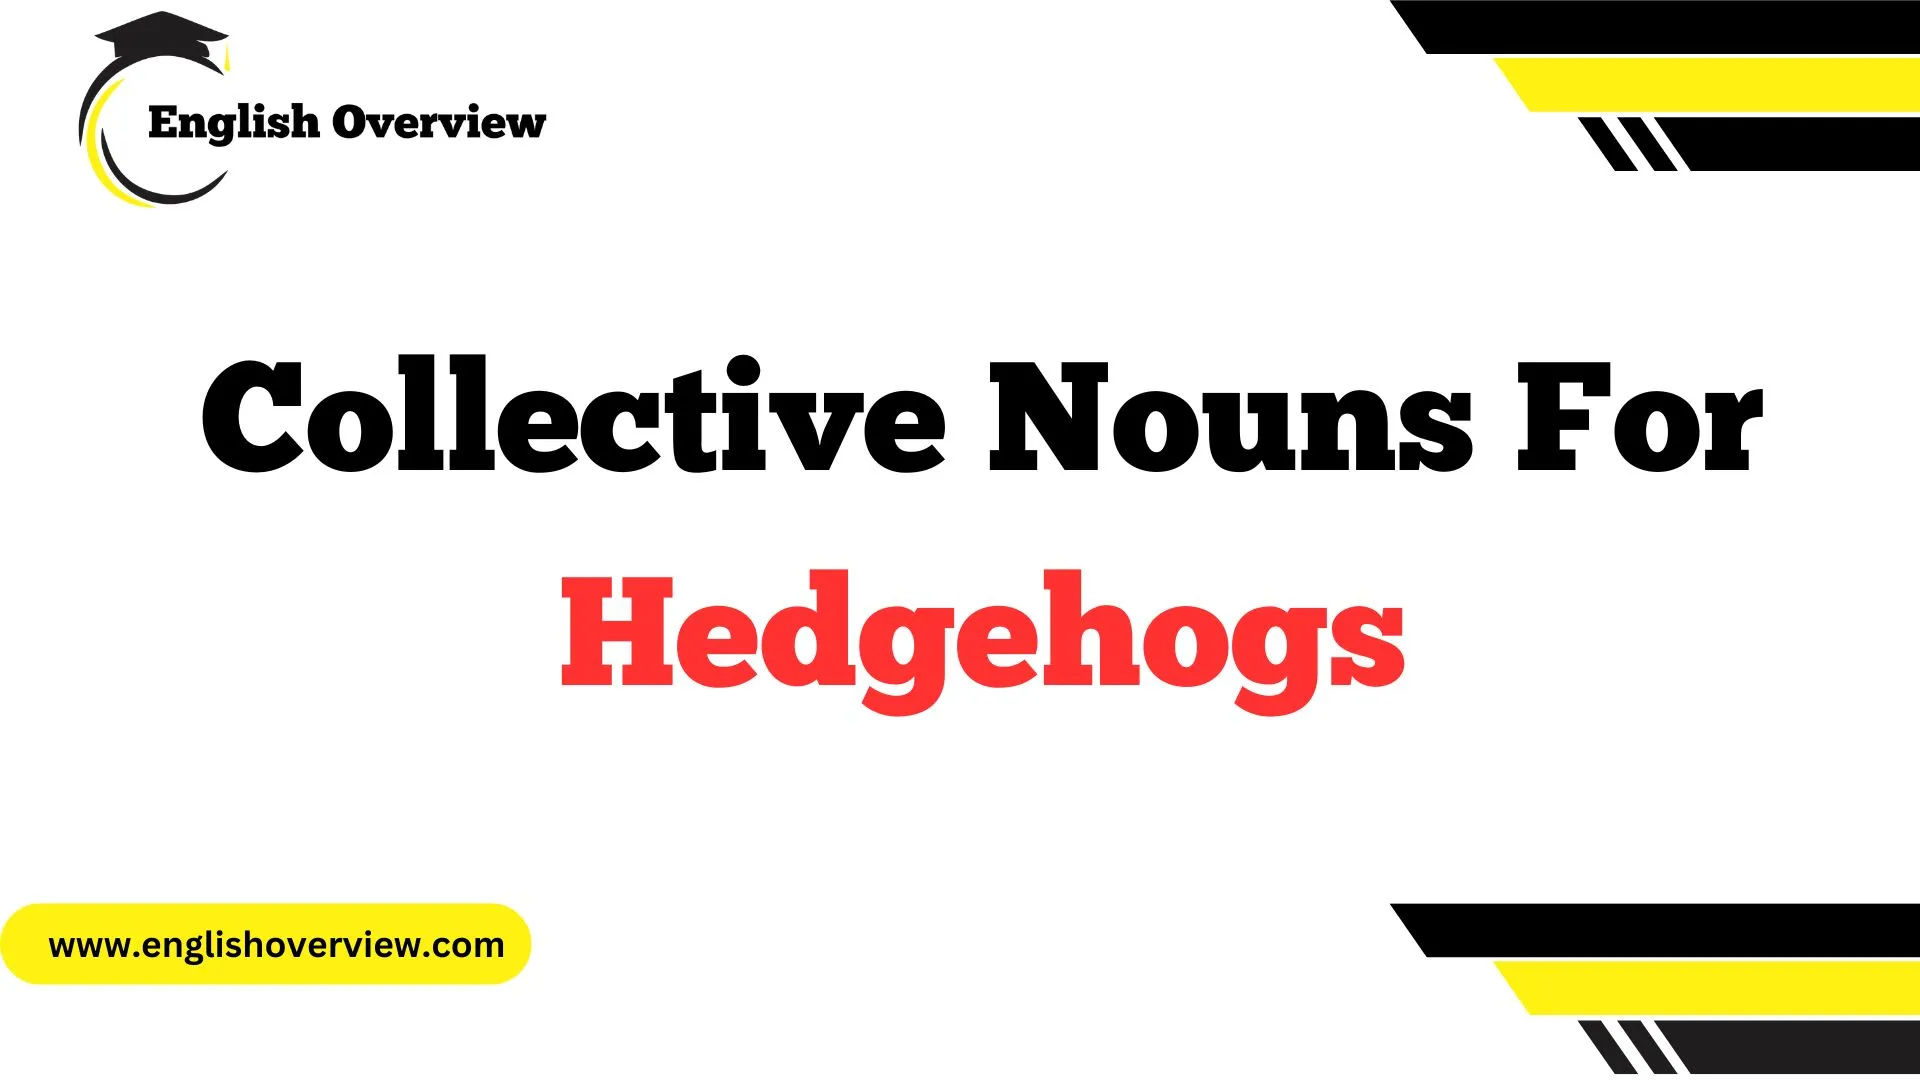 Collective Nouns For Hedgehogs